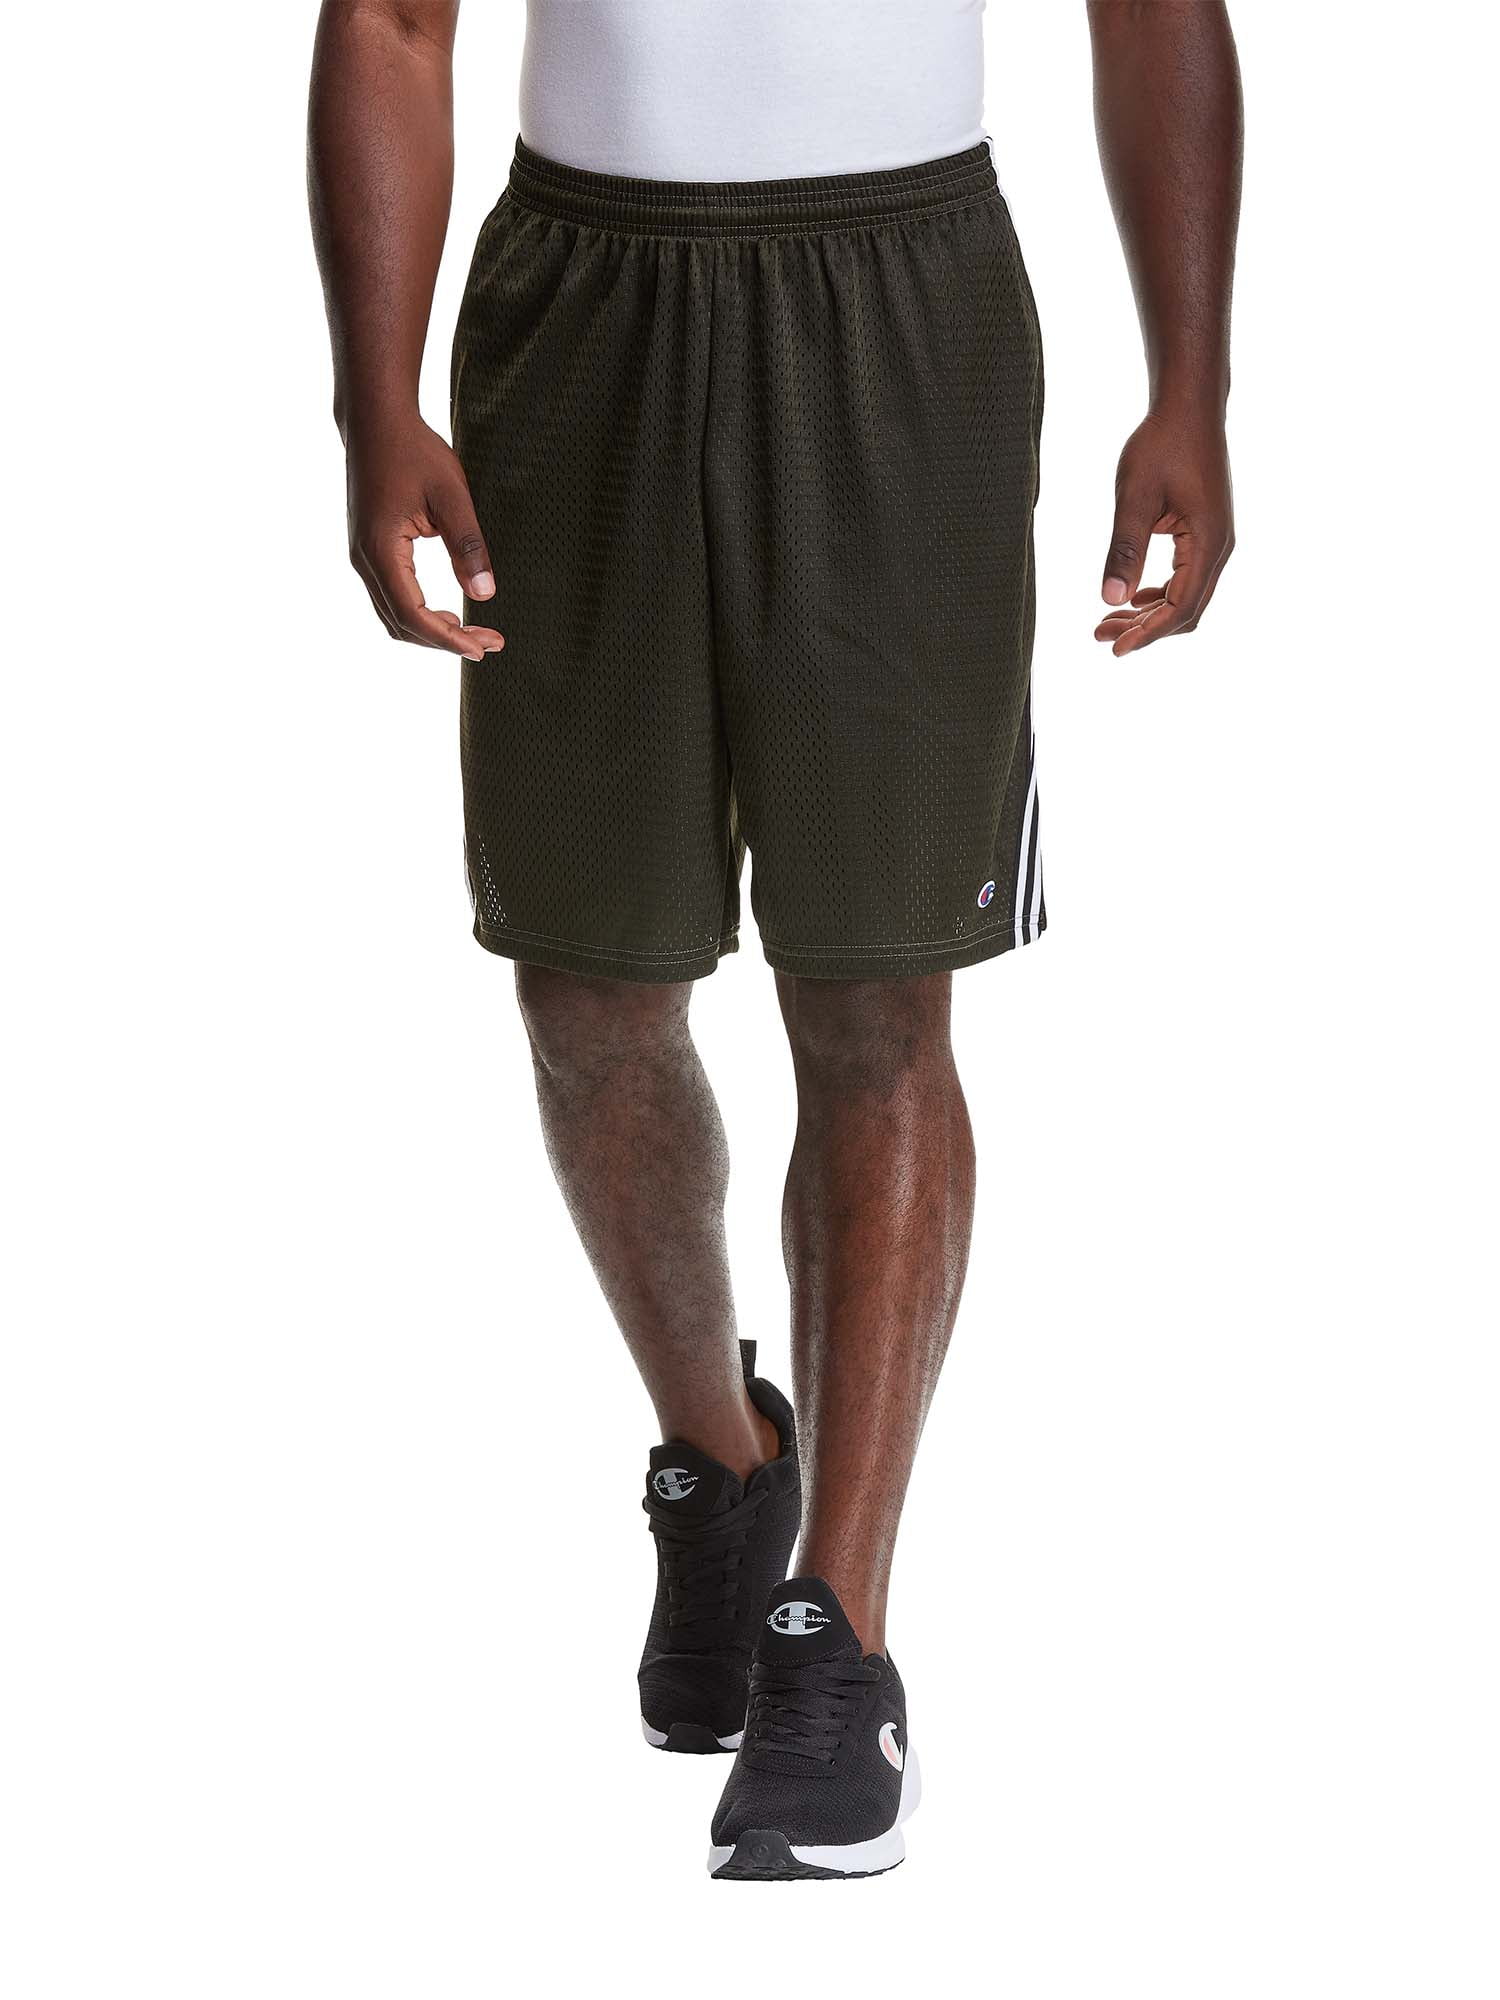 Russell Men's Green Athletic Workout Running Shorts Size 2xl for sale online 